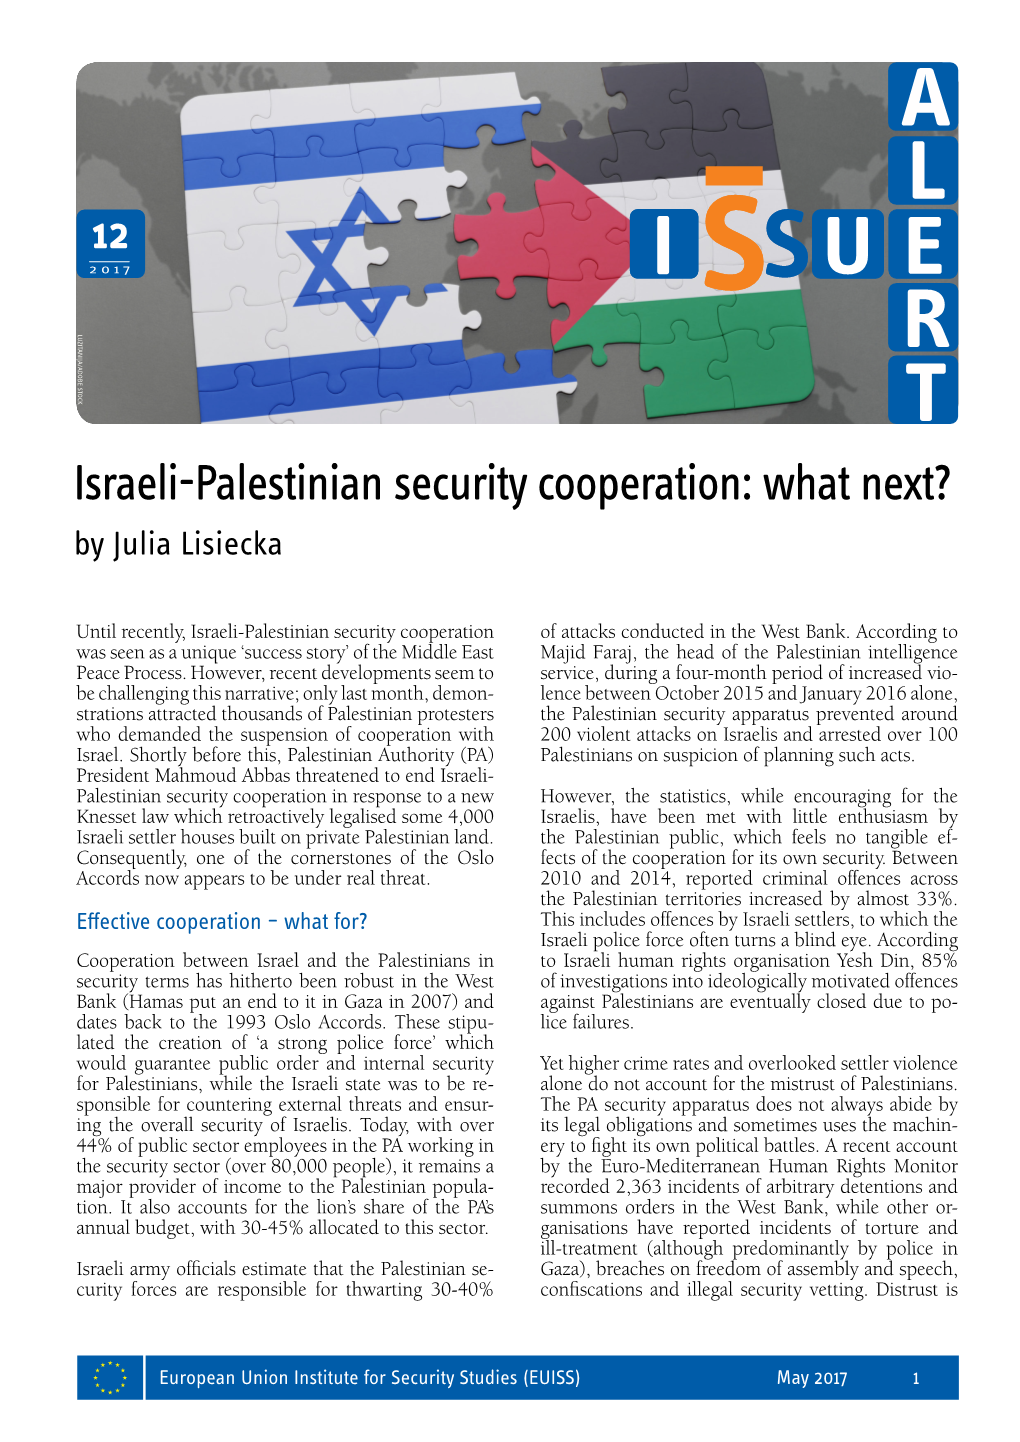 Israeli-Palestinian Security Cooperation: What Next? by Julia Lisiecka